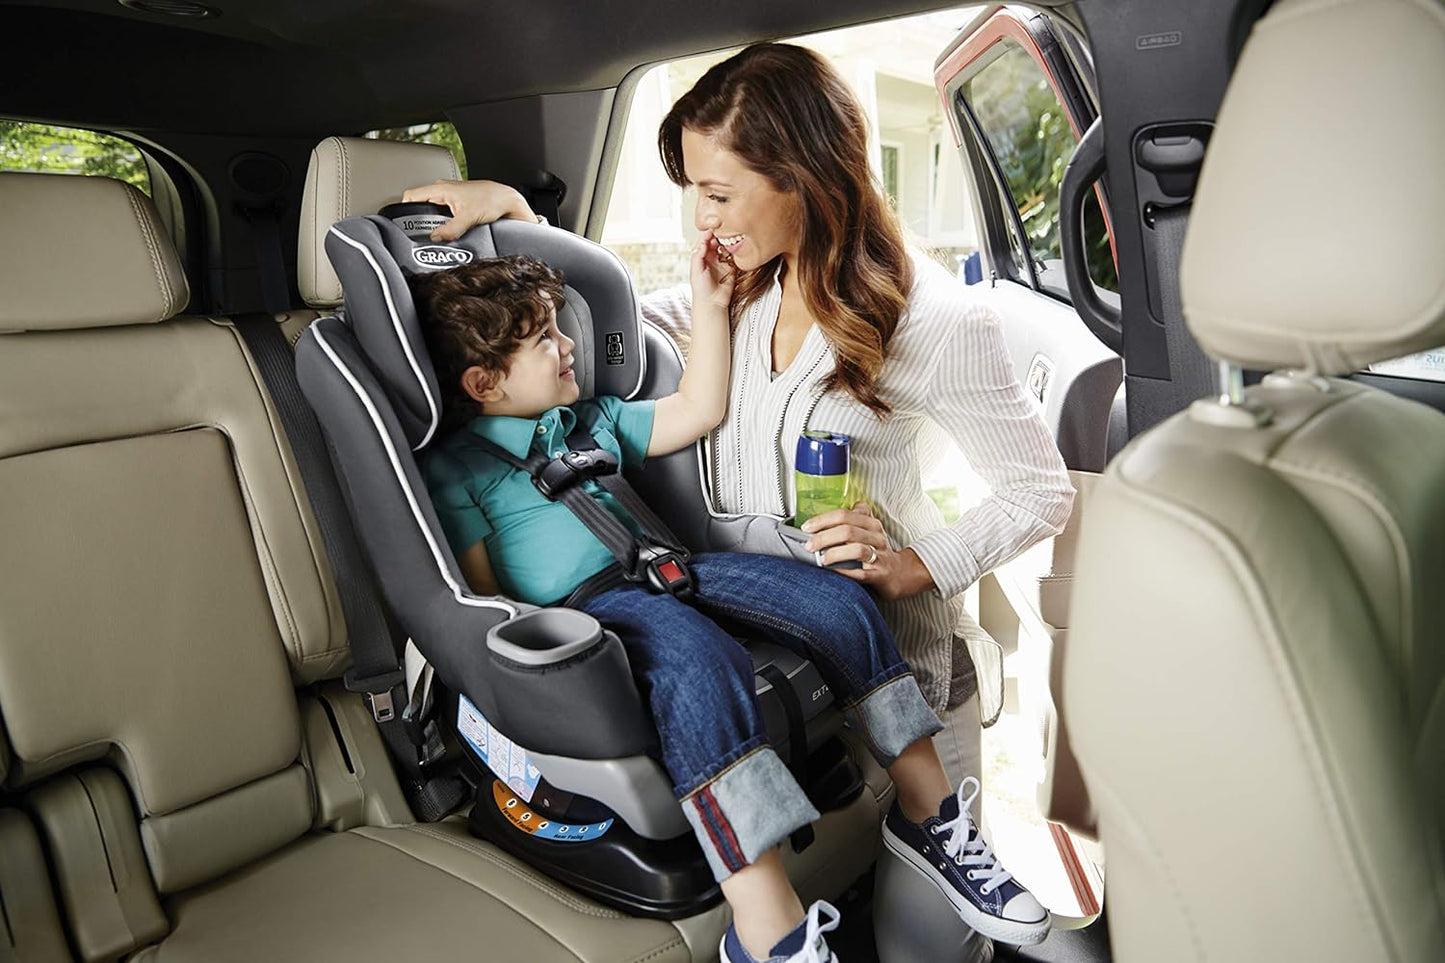 Graco Extend2Fit 3-in-1 Car Seat 🚗 - Ultimate Safety & Versatility